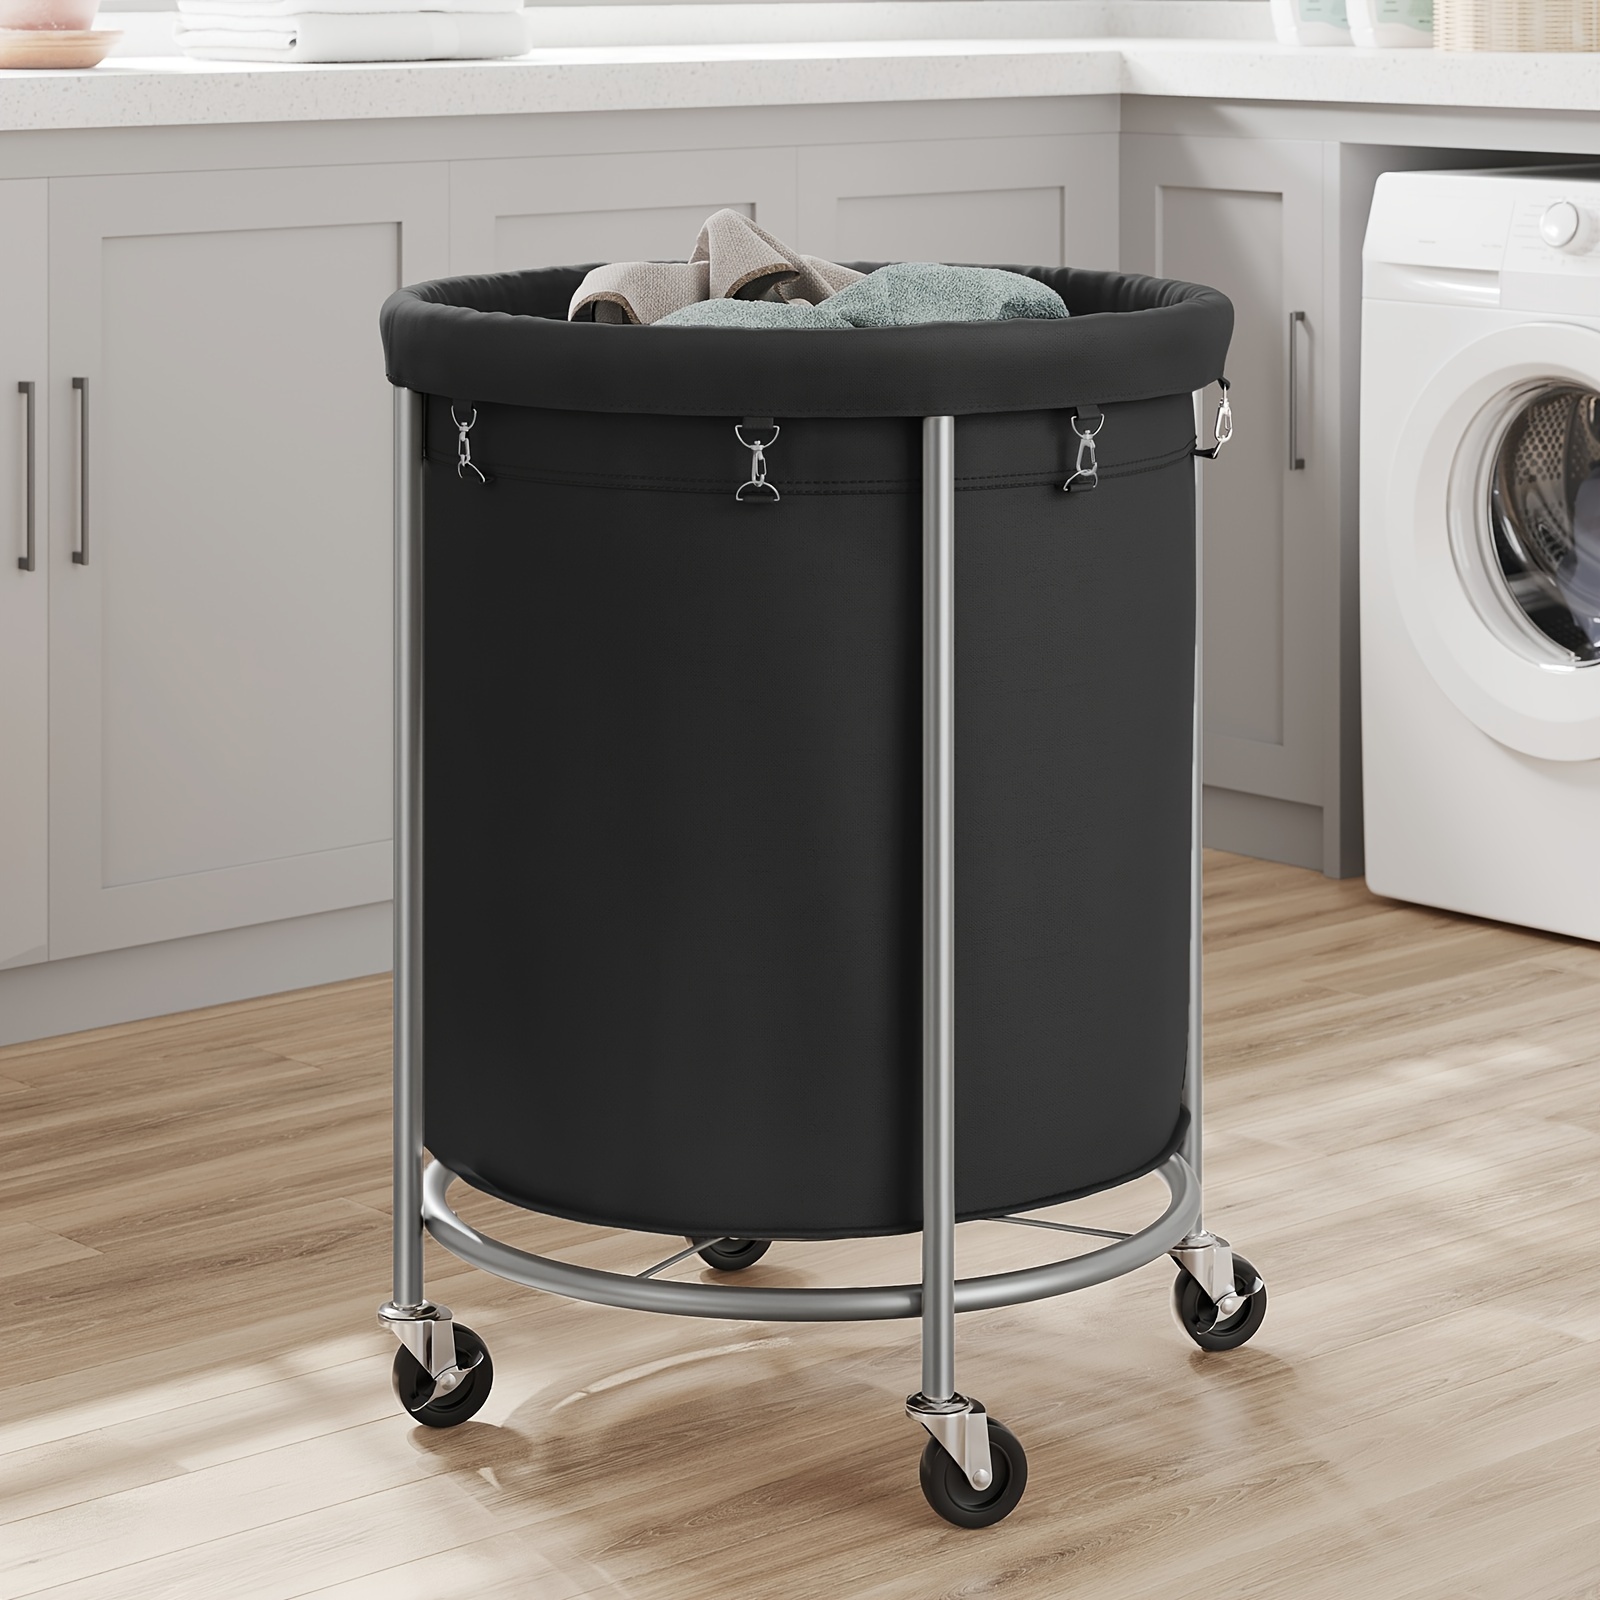 

1pc Laundry Basket With Wheels, Rolling Laundry Hamper, 45 Gal., Round Laundry Cart With Steel Frame And Removable Bag, 4 Casters And 2 Brakes